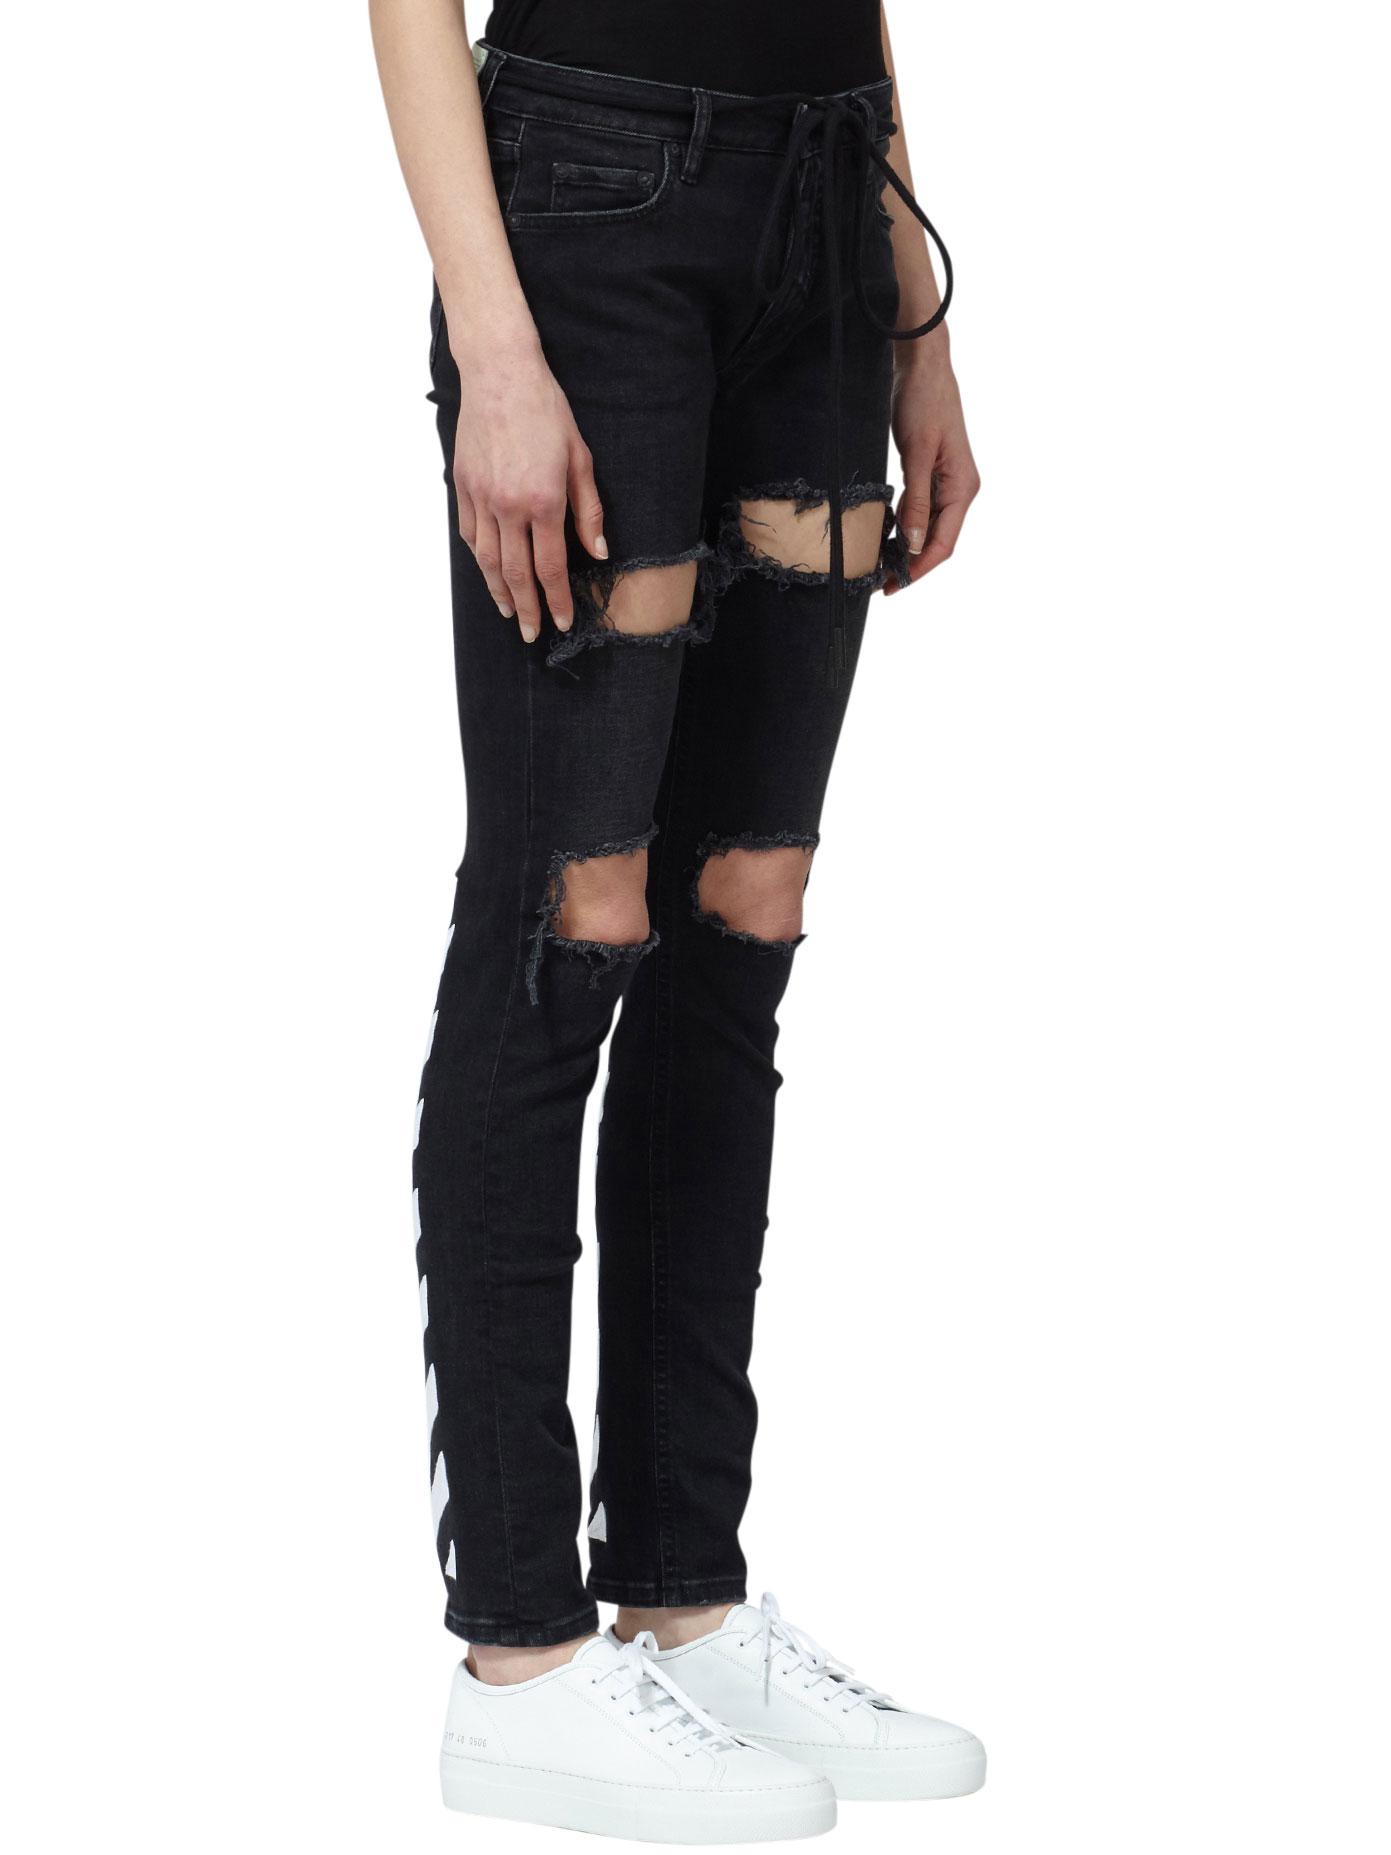 Off-white c/o virgil abloh Striped Ripped Skinny Jeans in Black | Lyst